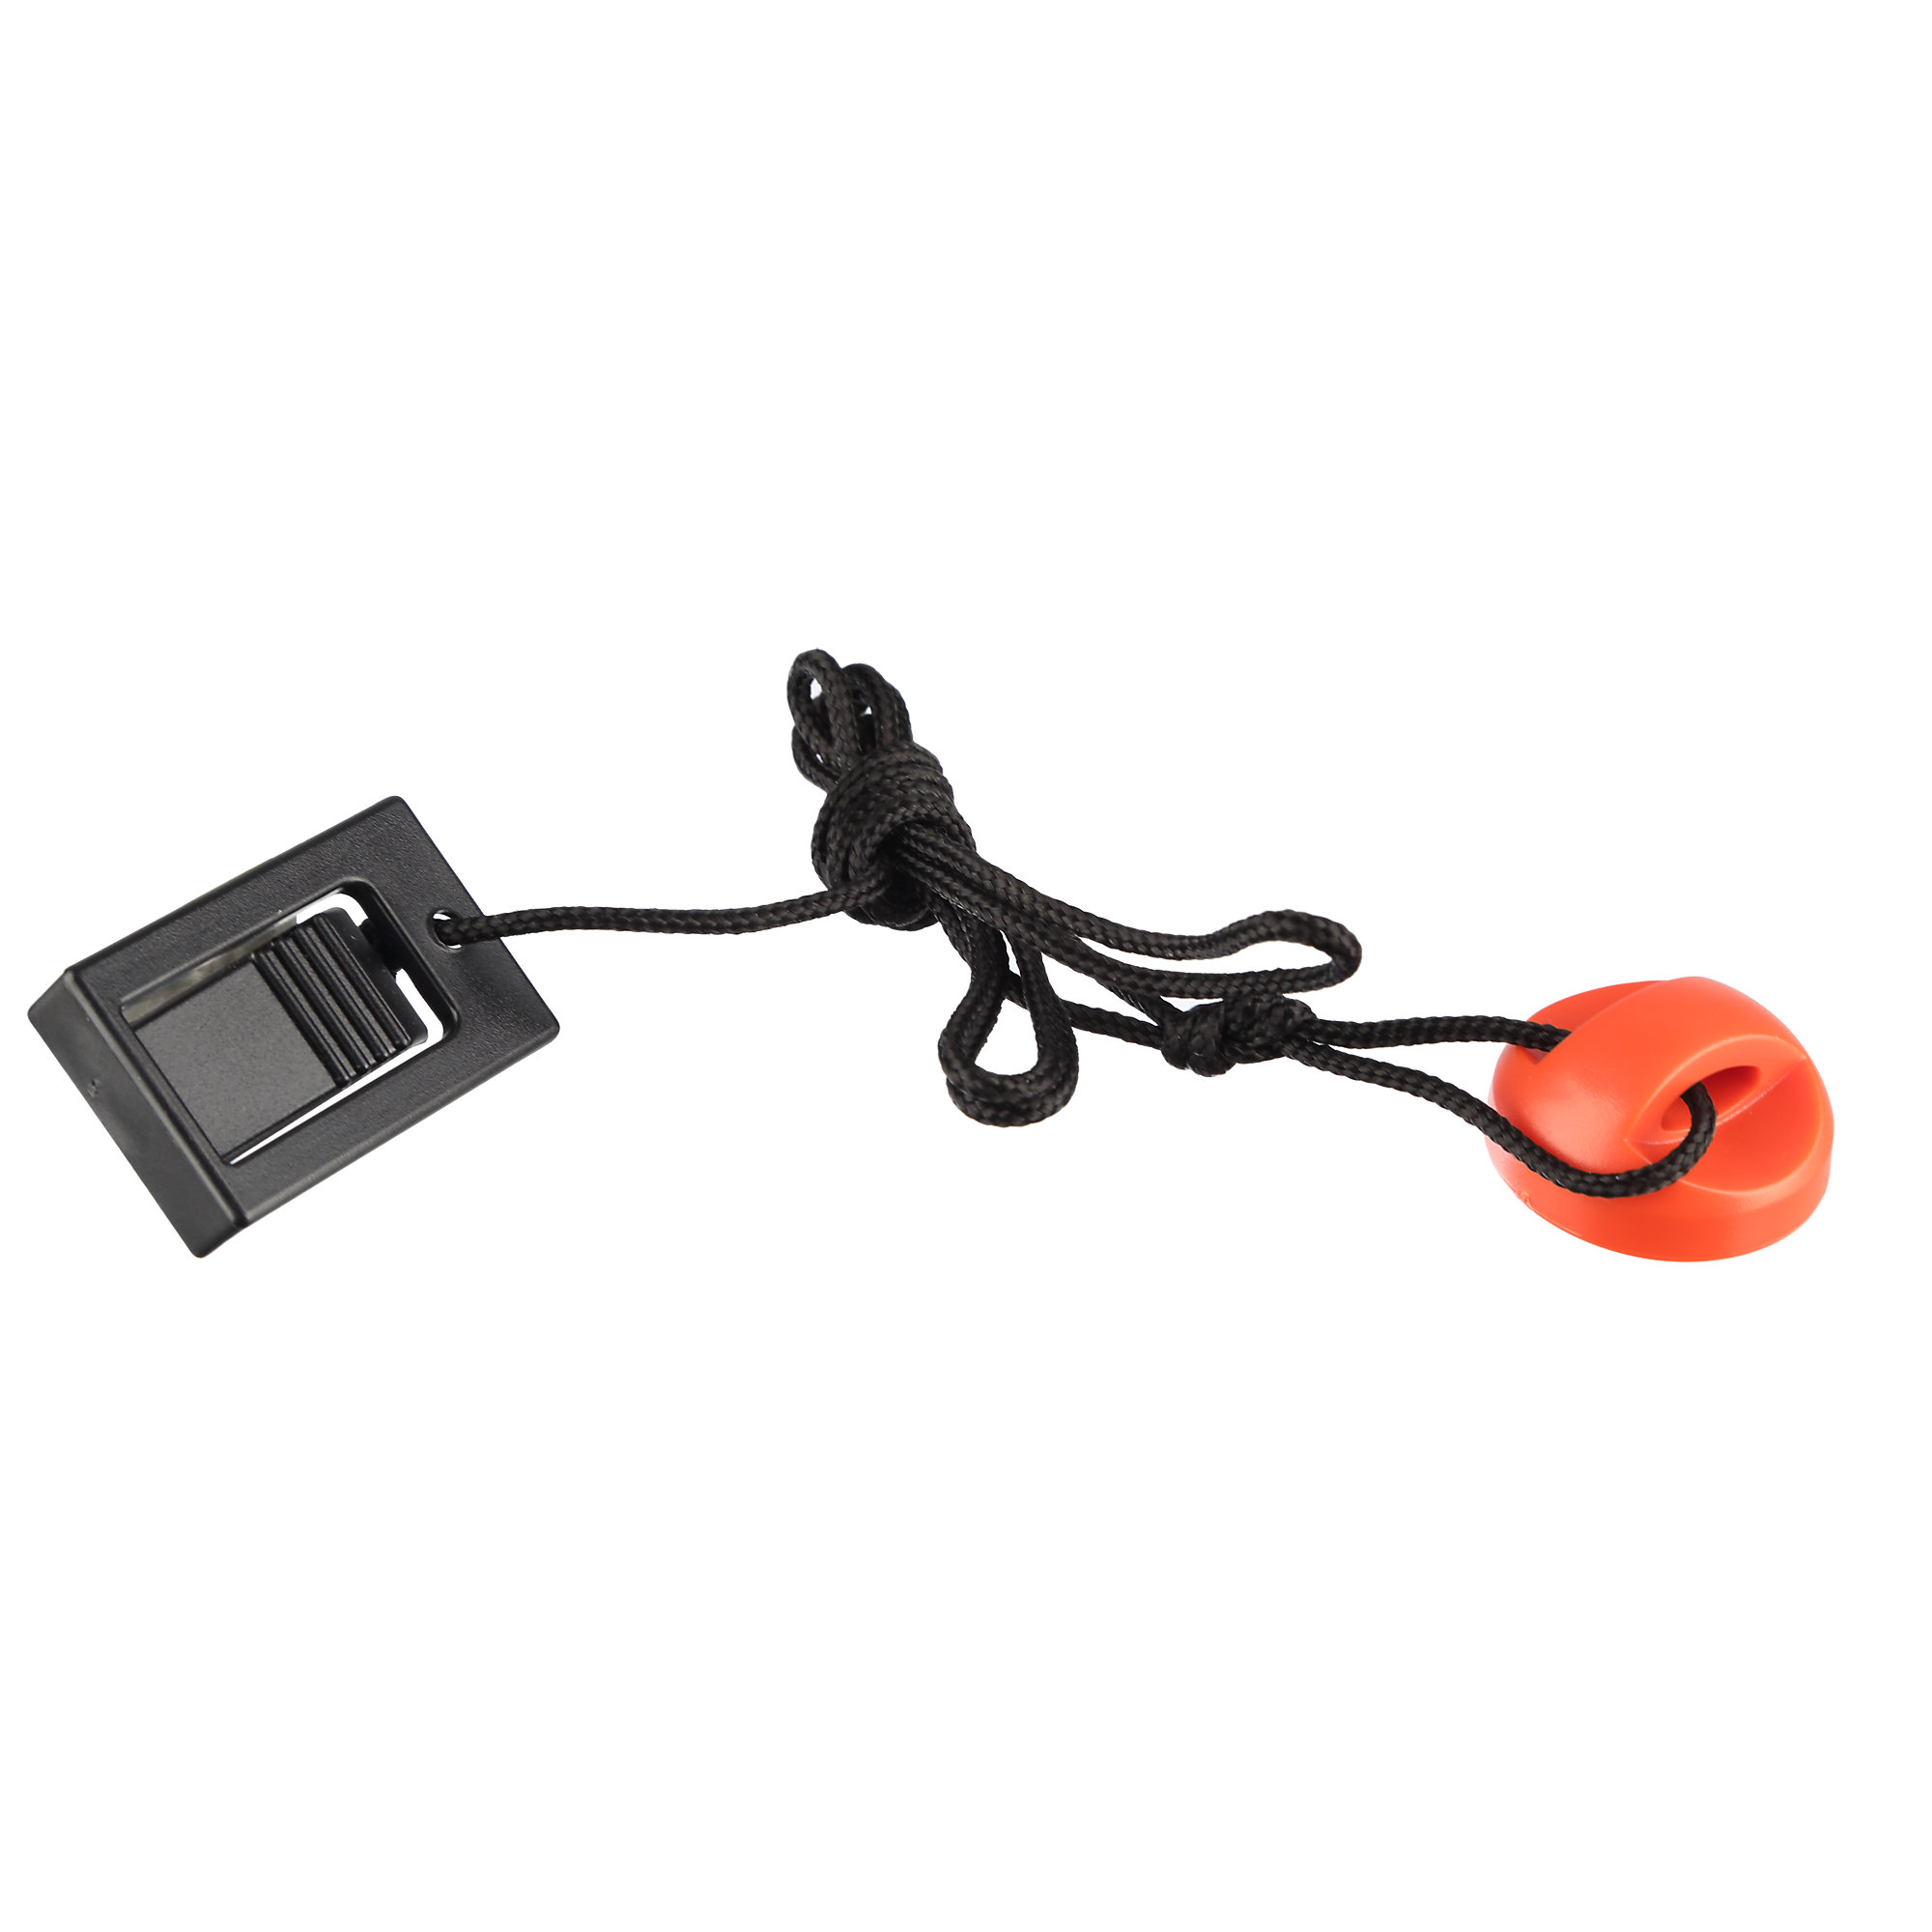 Magnetic Treadmill Safety Key and Clip